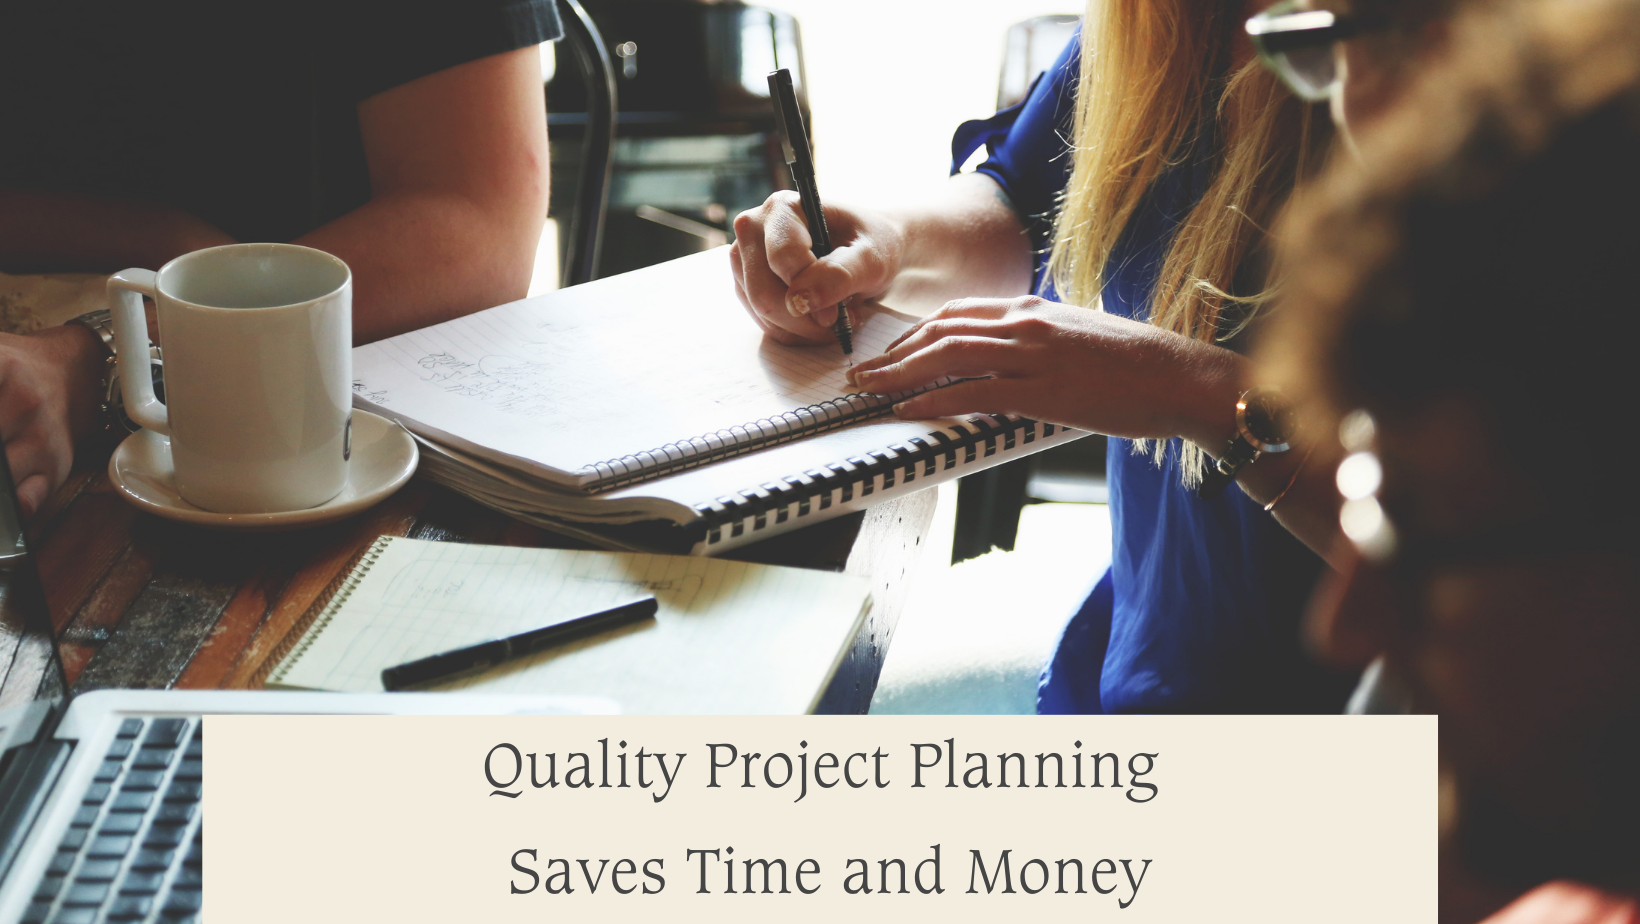 Quality Project Planning - Saves time and money